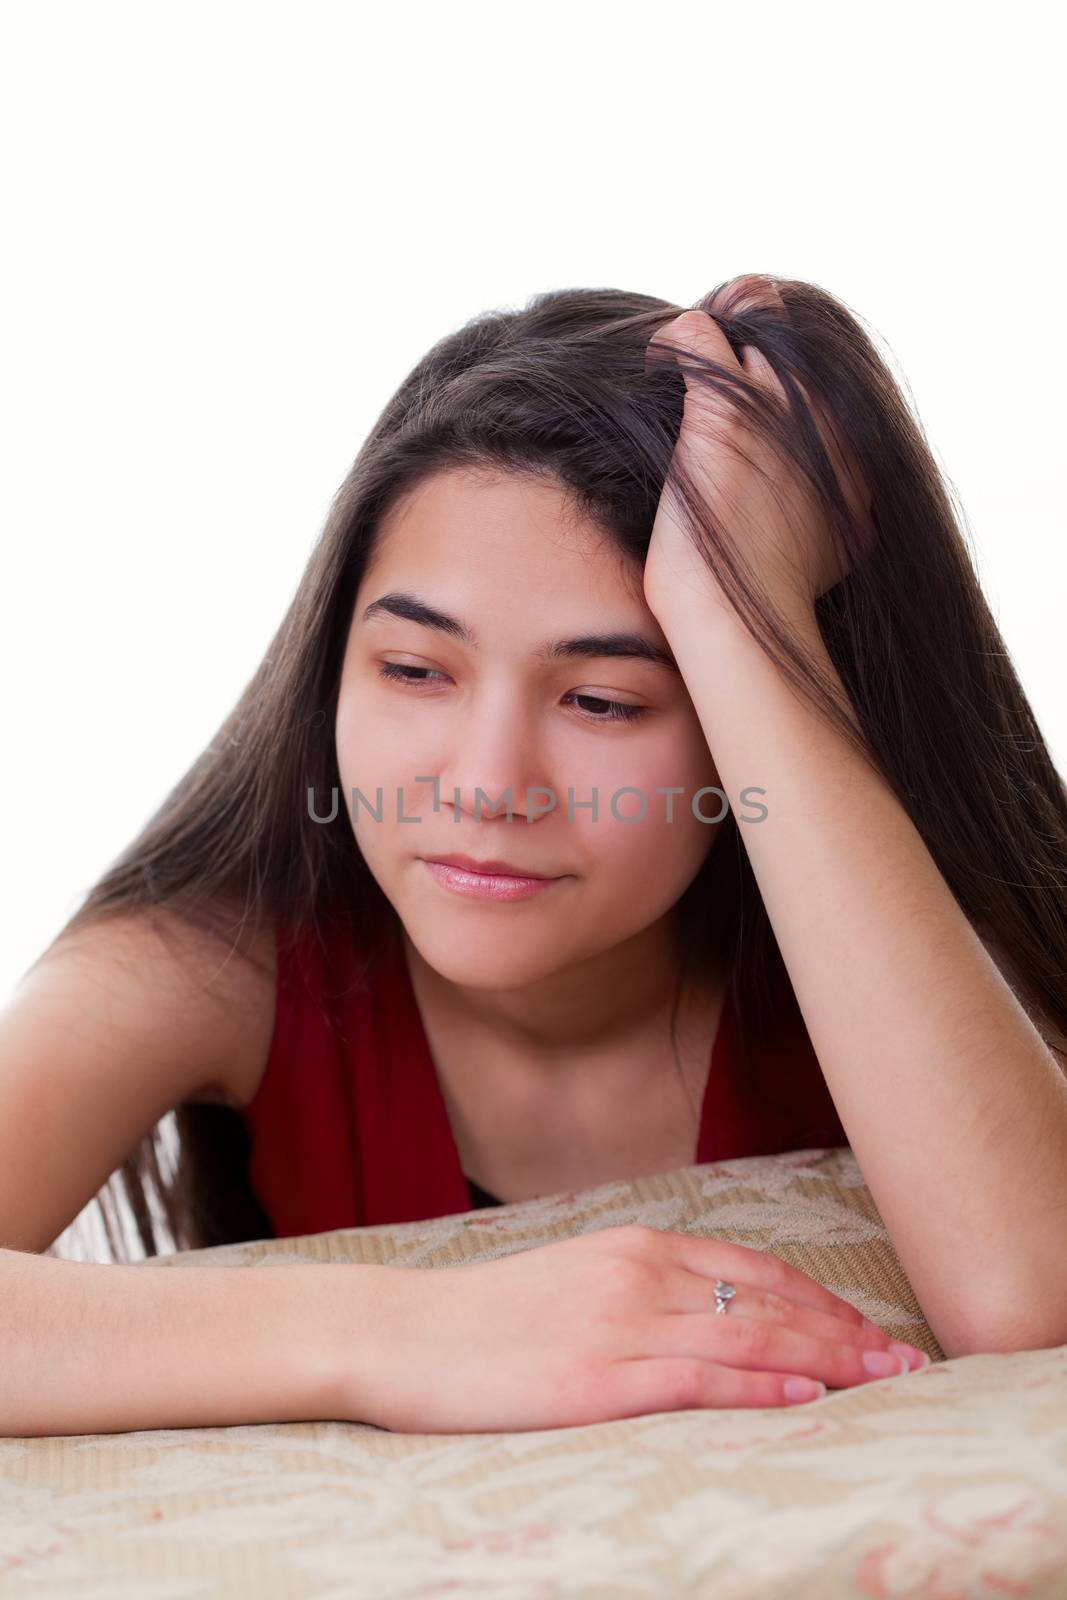 Biracial teen girl in red dress looking bored or tired, leaning head on hand